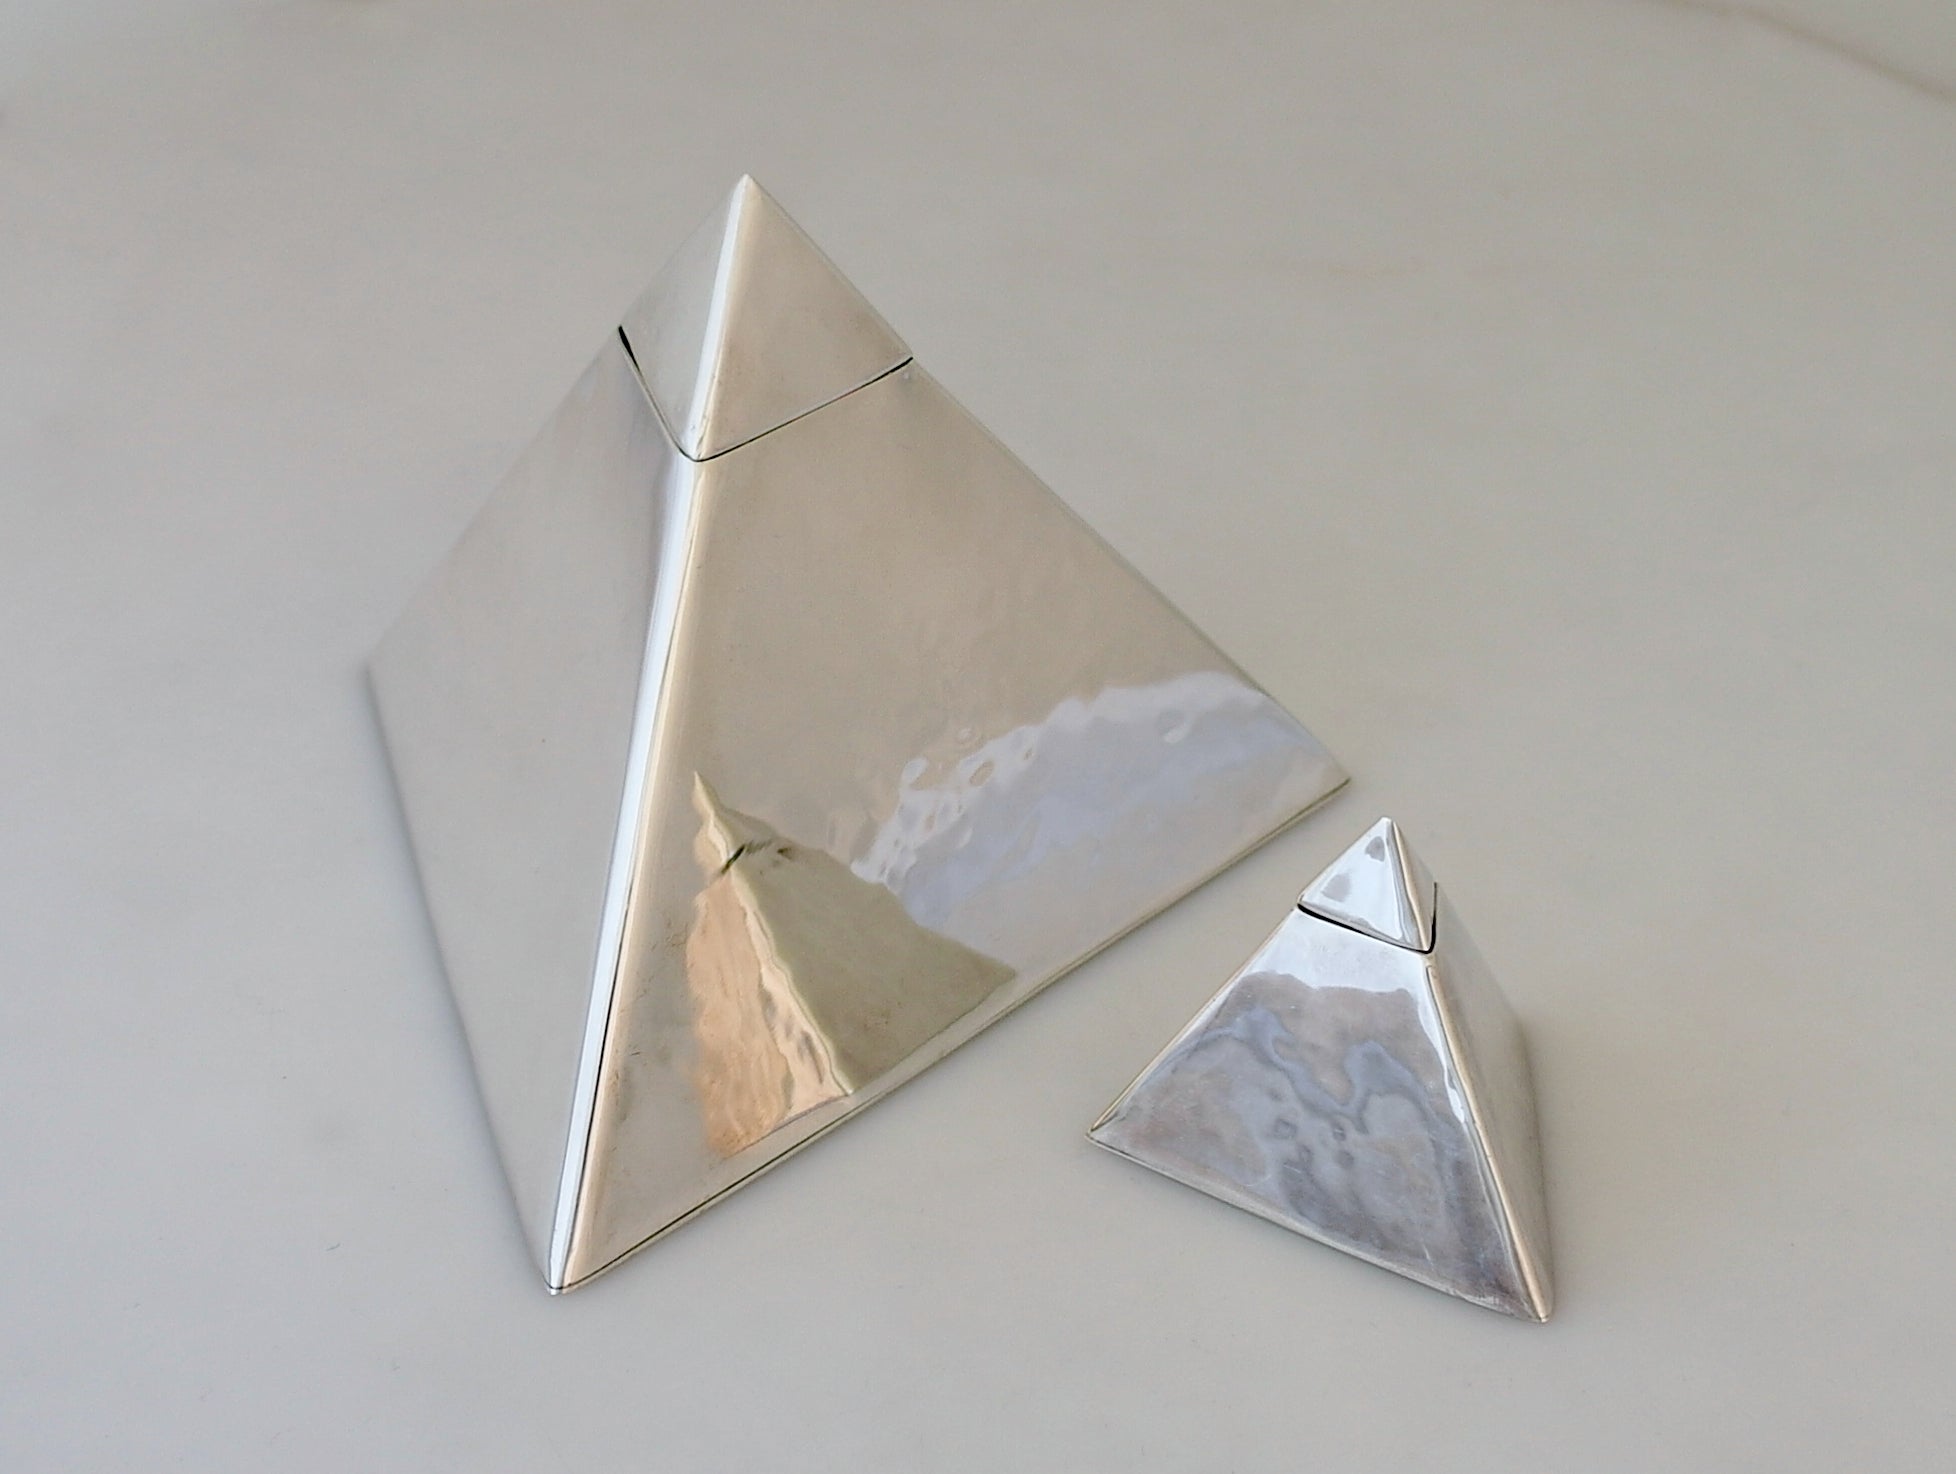 Superb Italian Sterling Silver Modernist Pyramid Boxes